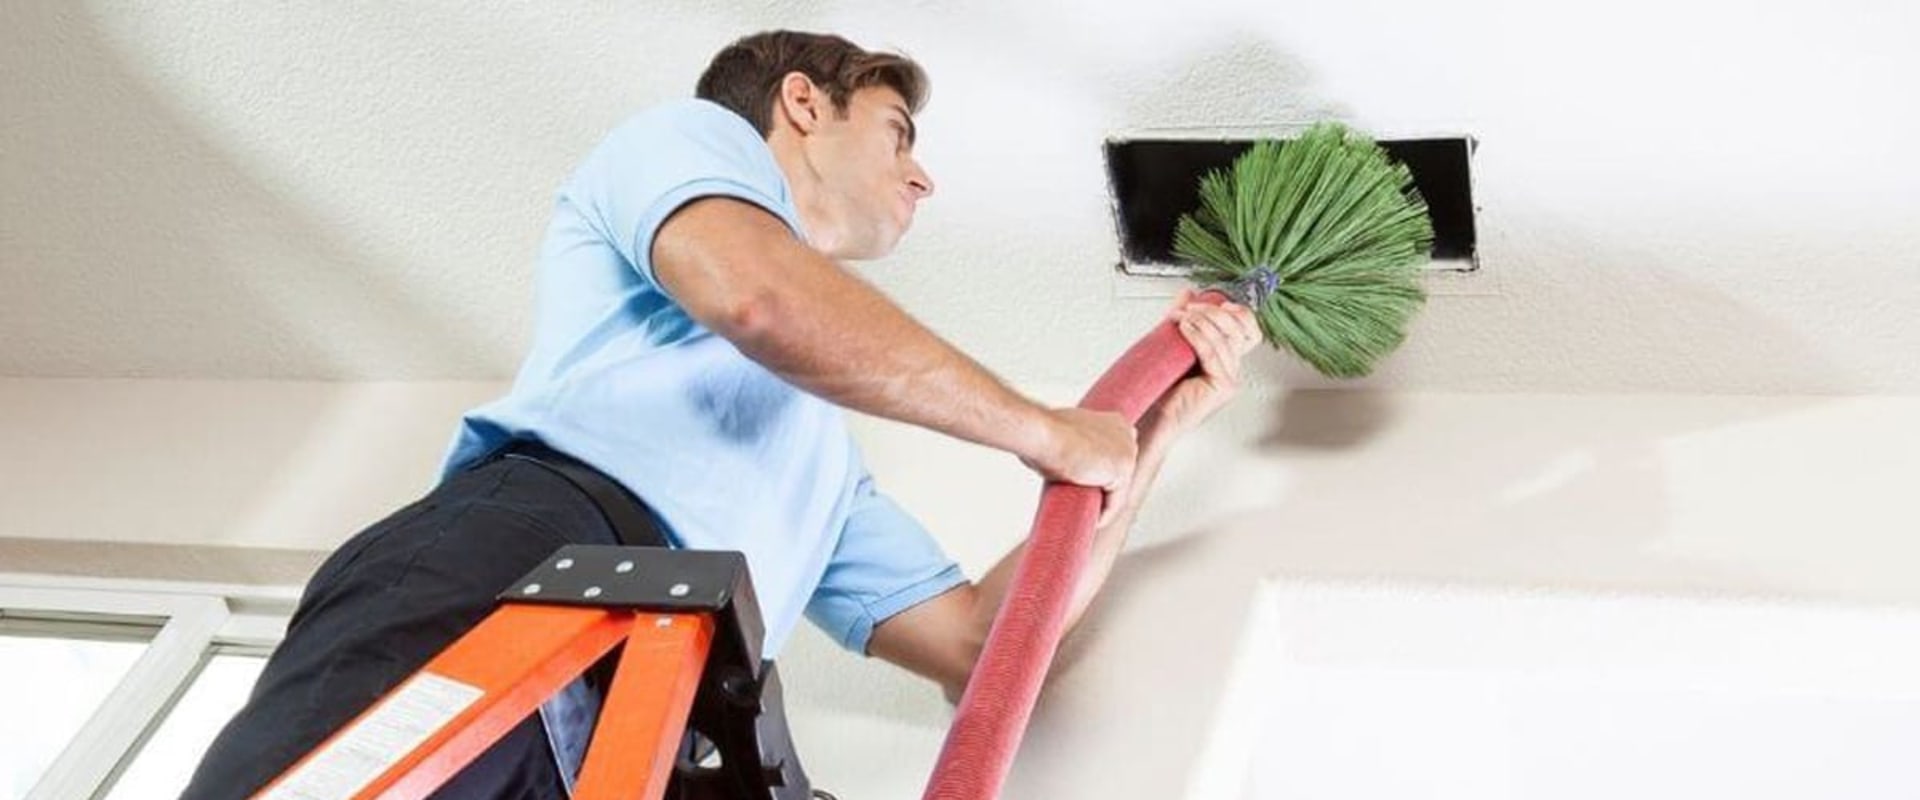 Vent Cleaning Services in Palm Beach County, FL: Regulations and Benefits